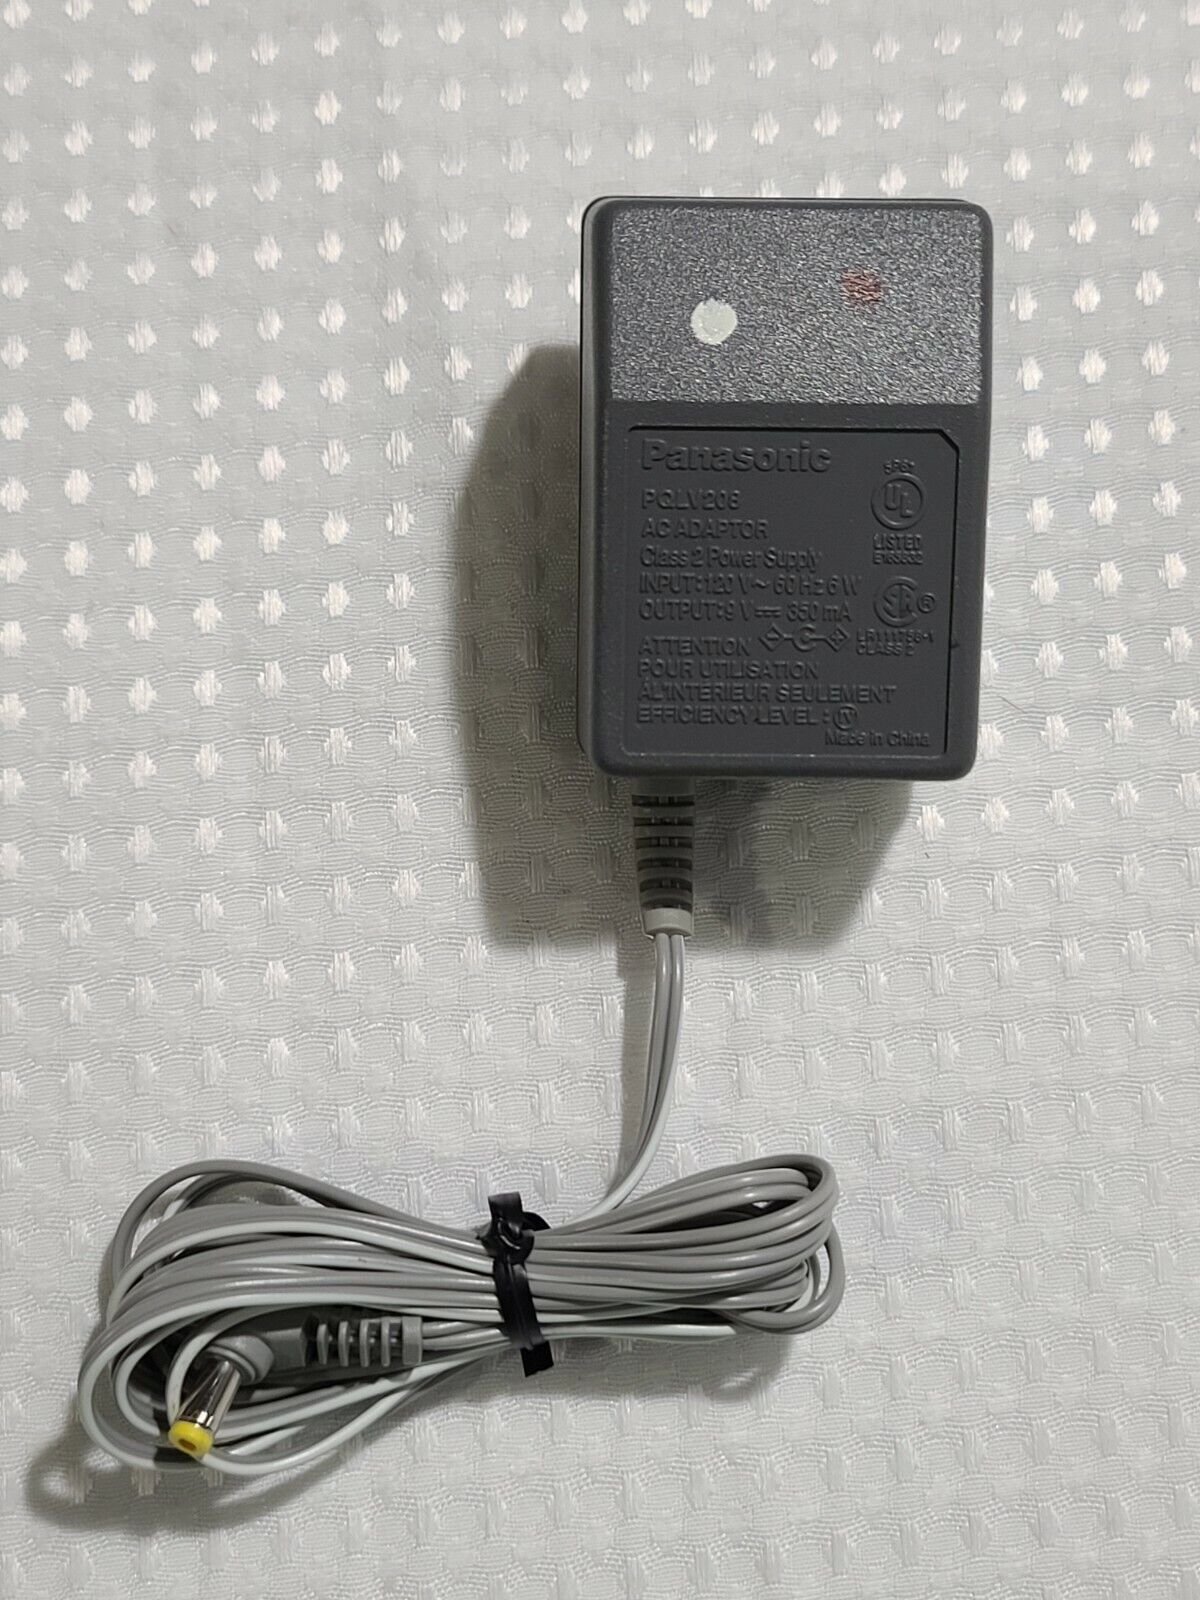 Panasonic PQLV208 Power Supply Charger AC Adapter 9V 350mA for Cordless Phone